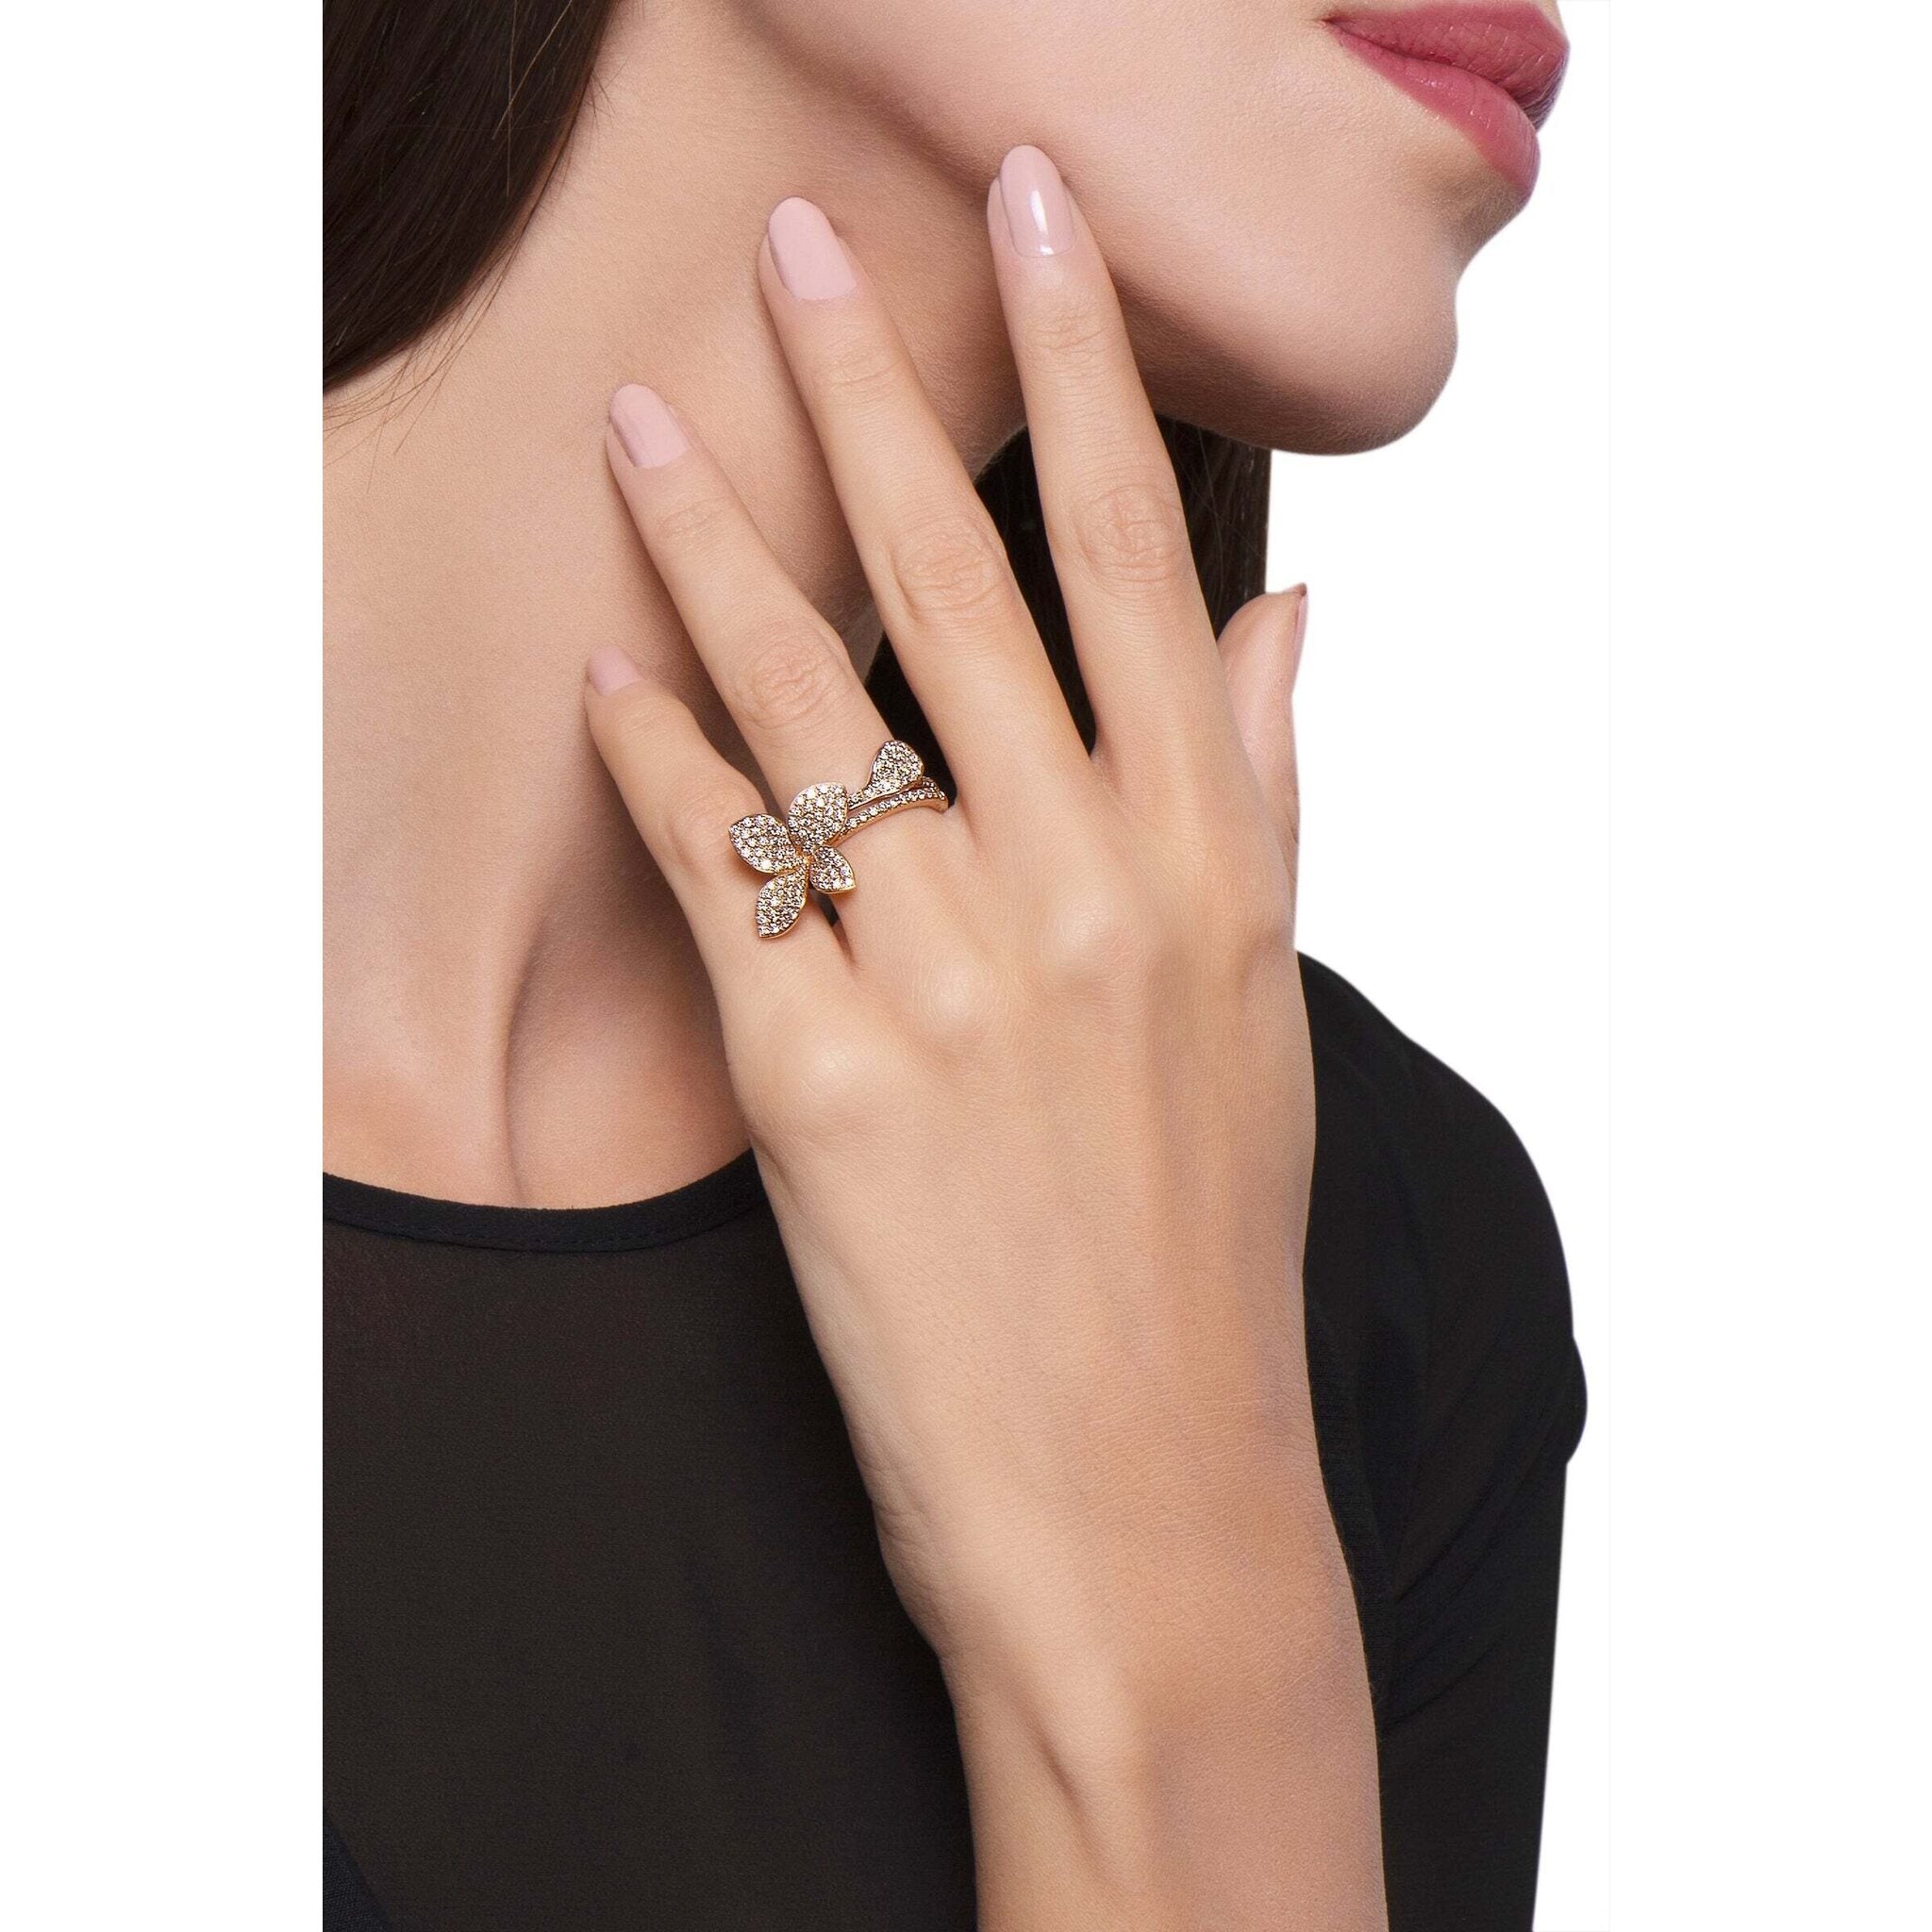 Pasquale Bruni - Petit Garden Ring in 18K Rose Gold with White and Champagne Diamonds, Single Leaf 13 / Size 6.25 US